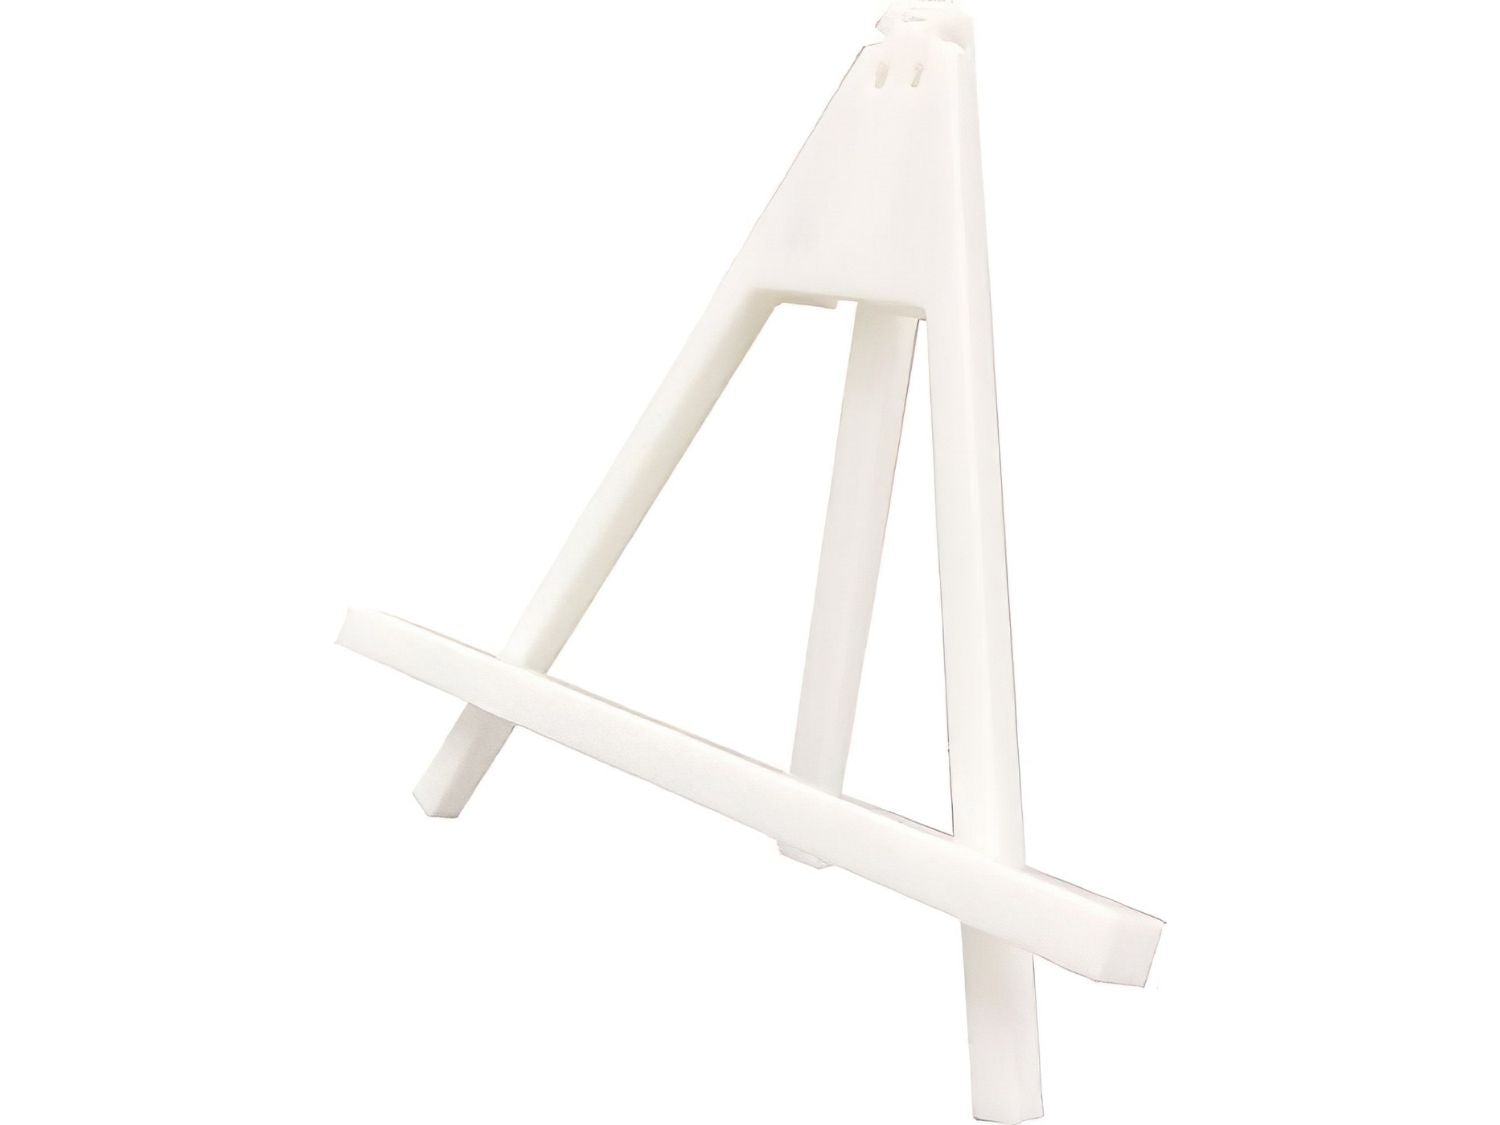 Ensky • Accessories • Artboard Jigsaw Easel Stand / White　Puzzle Stand